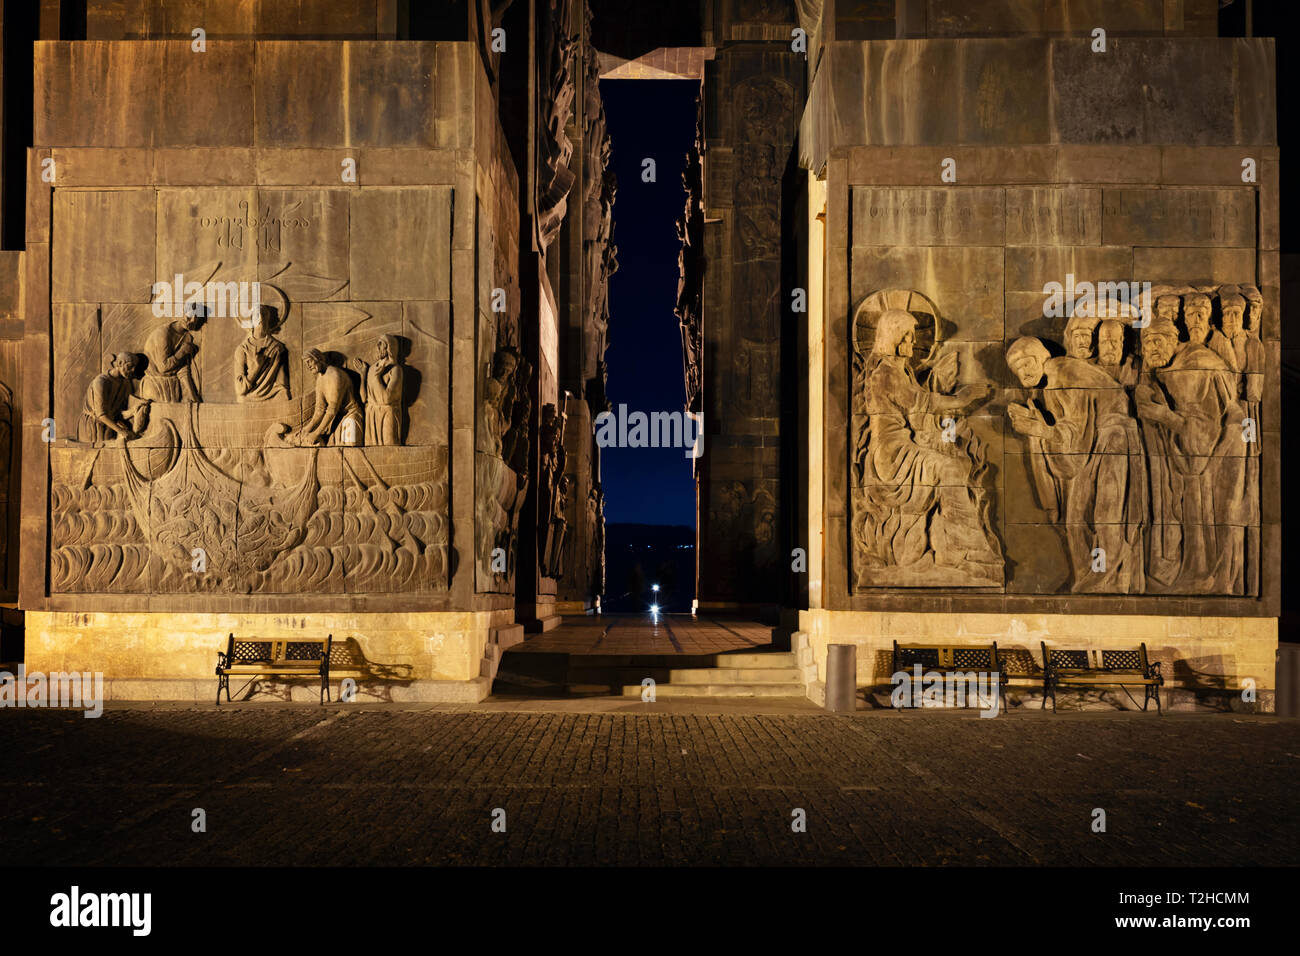 Georgia, Tbilisi - 05.02.2019. - Relief carvings on the walls of massive monumental structure Chronicles of Georgia - Night image Stock Photo